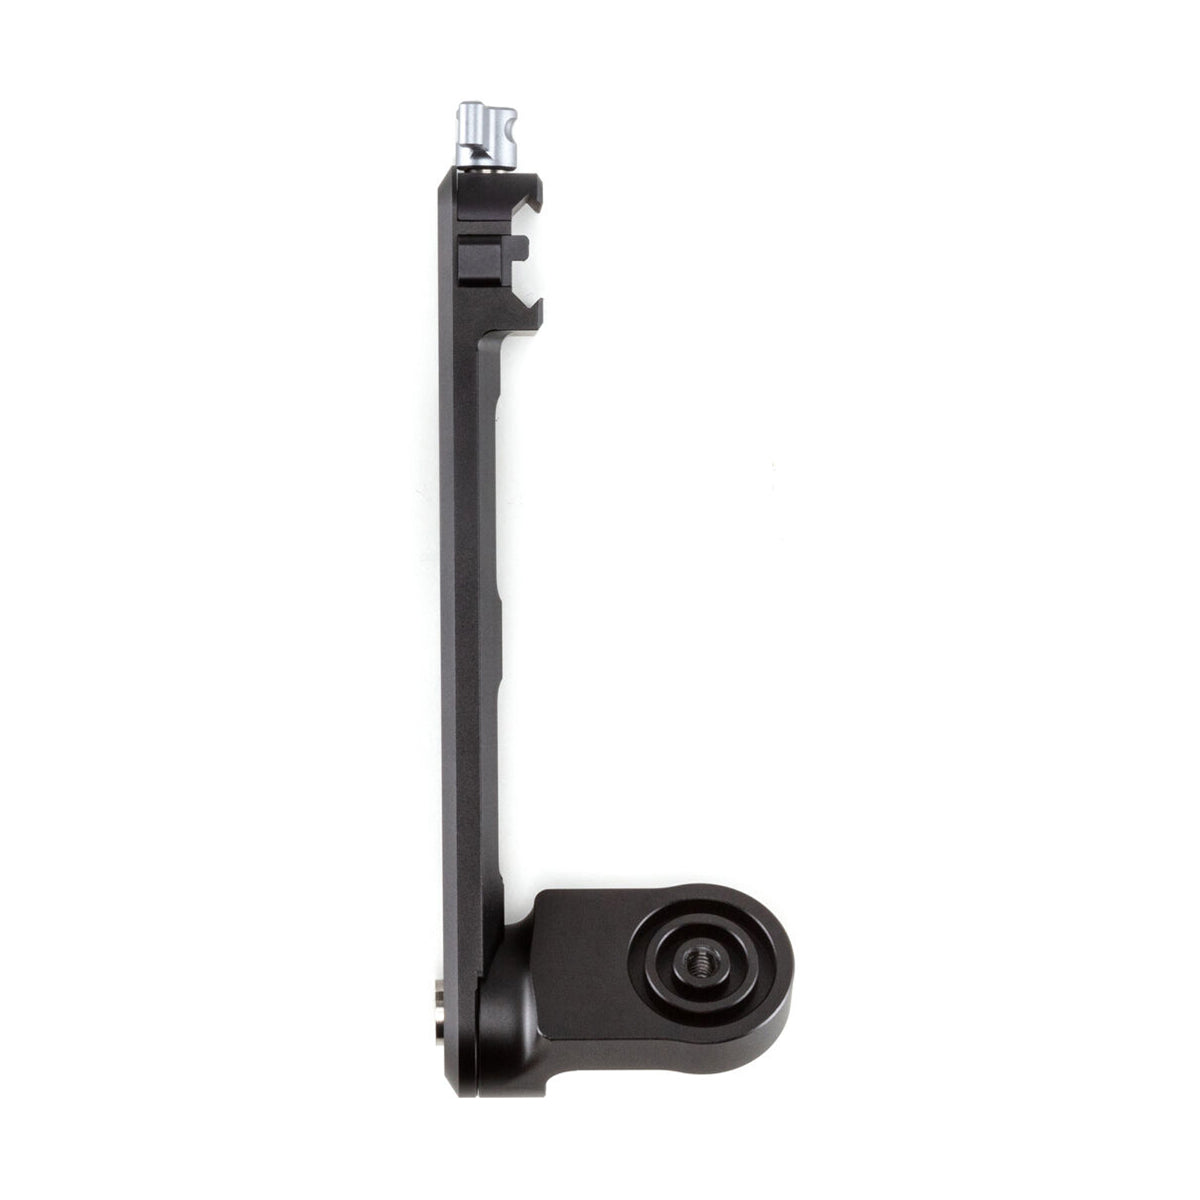 DJI R Briefcase Handle for RS 2 & RSC 2 Gimbals